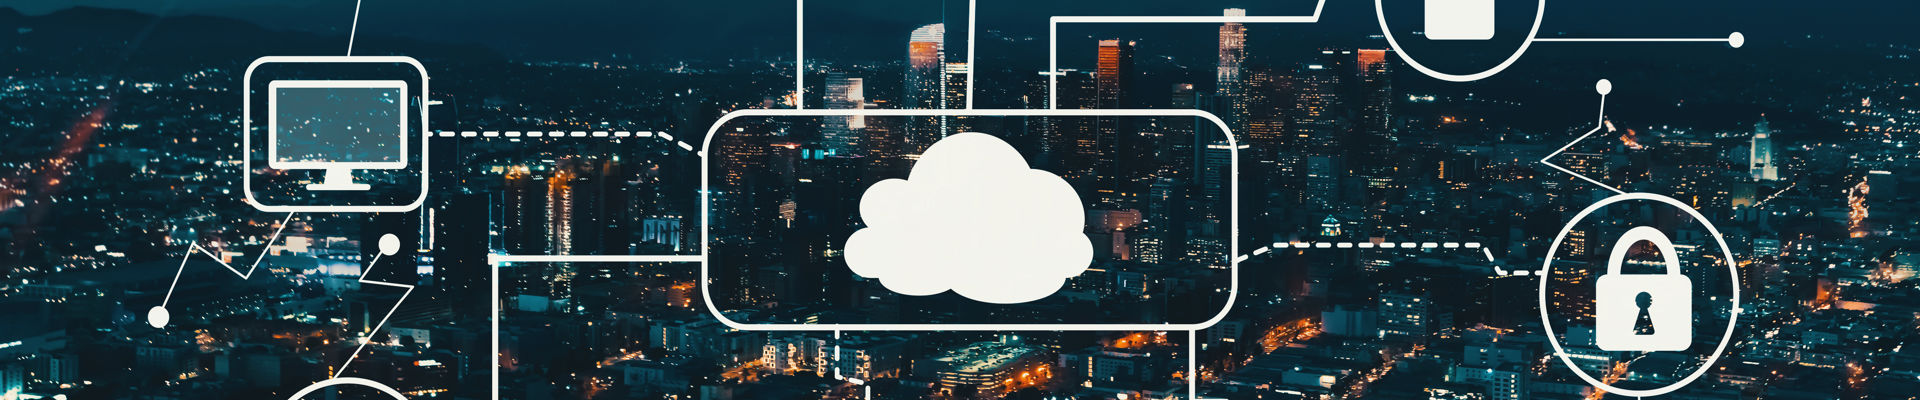 Cloud repatriation - are your IT workloads in the best place?